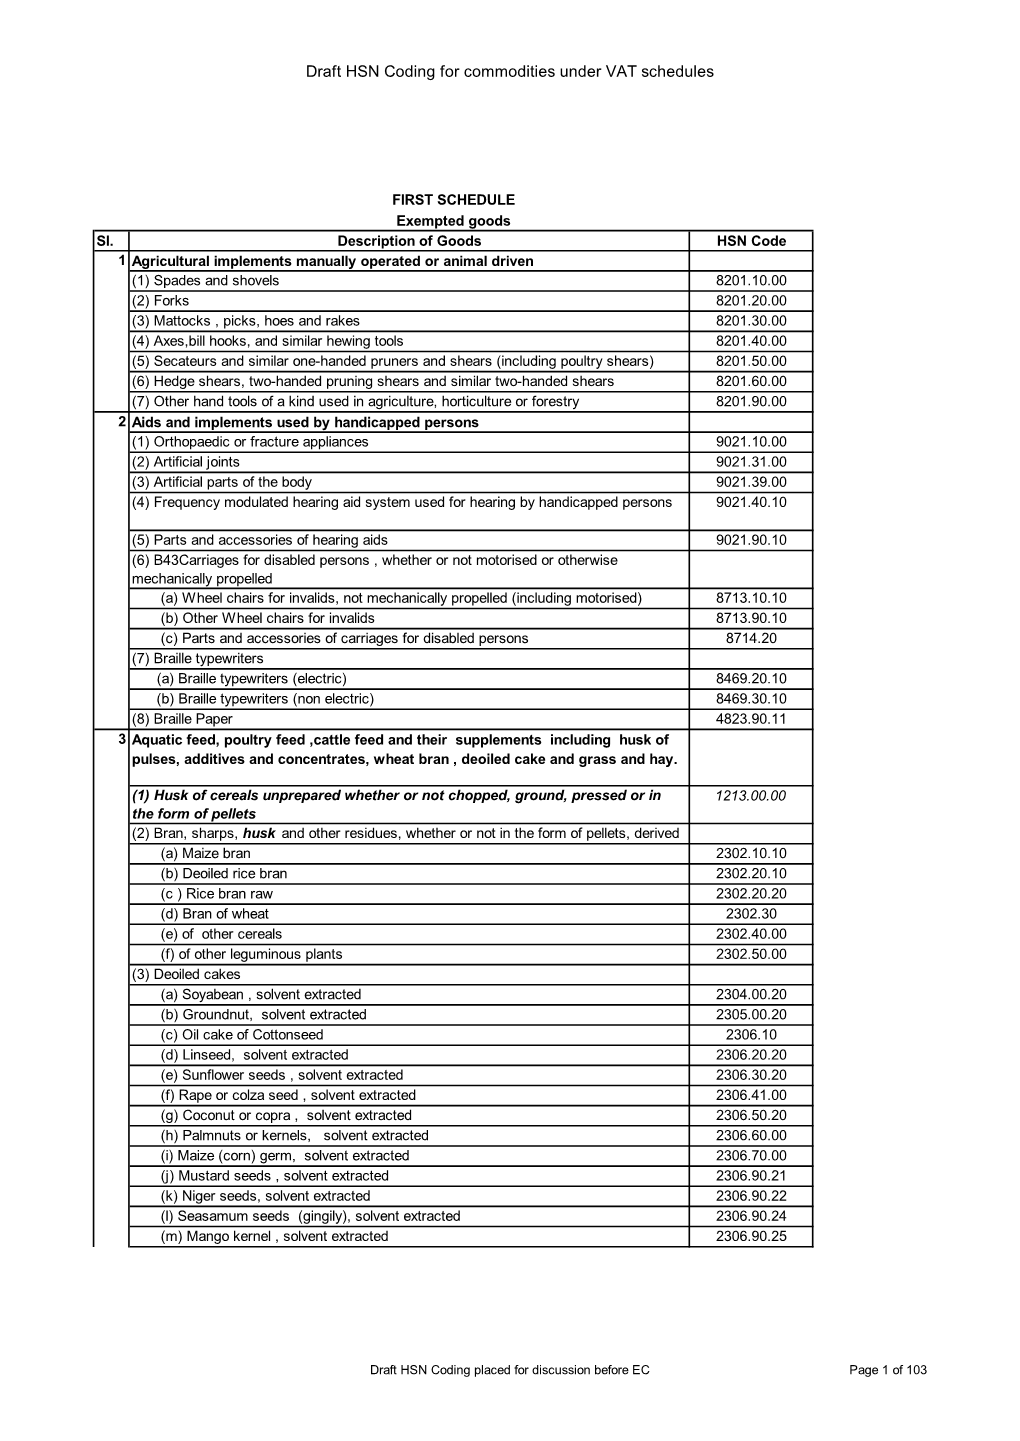 Draft HSN Coding for Commodities Under VAT Schedules